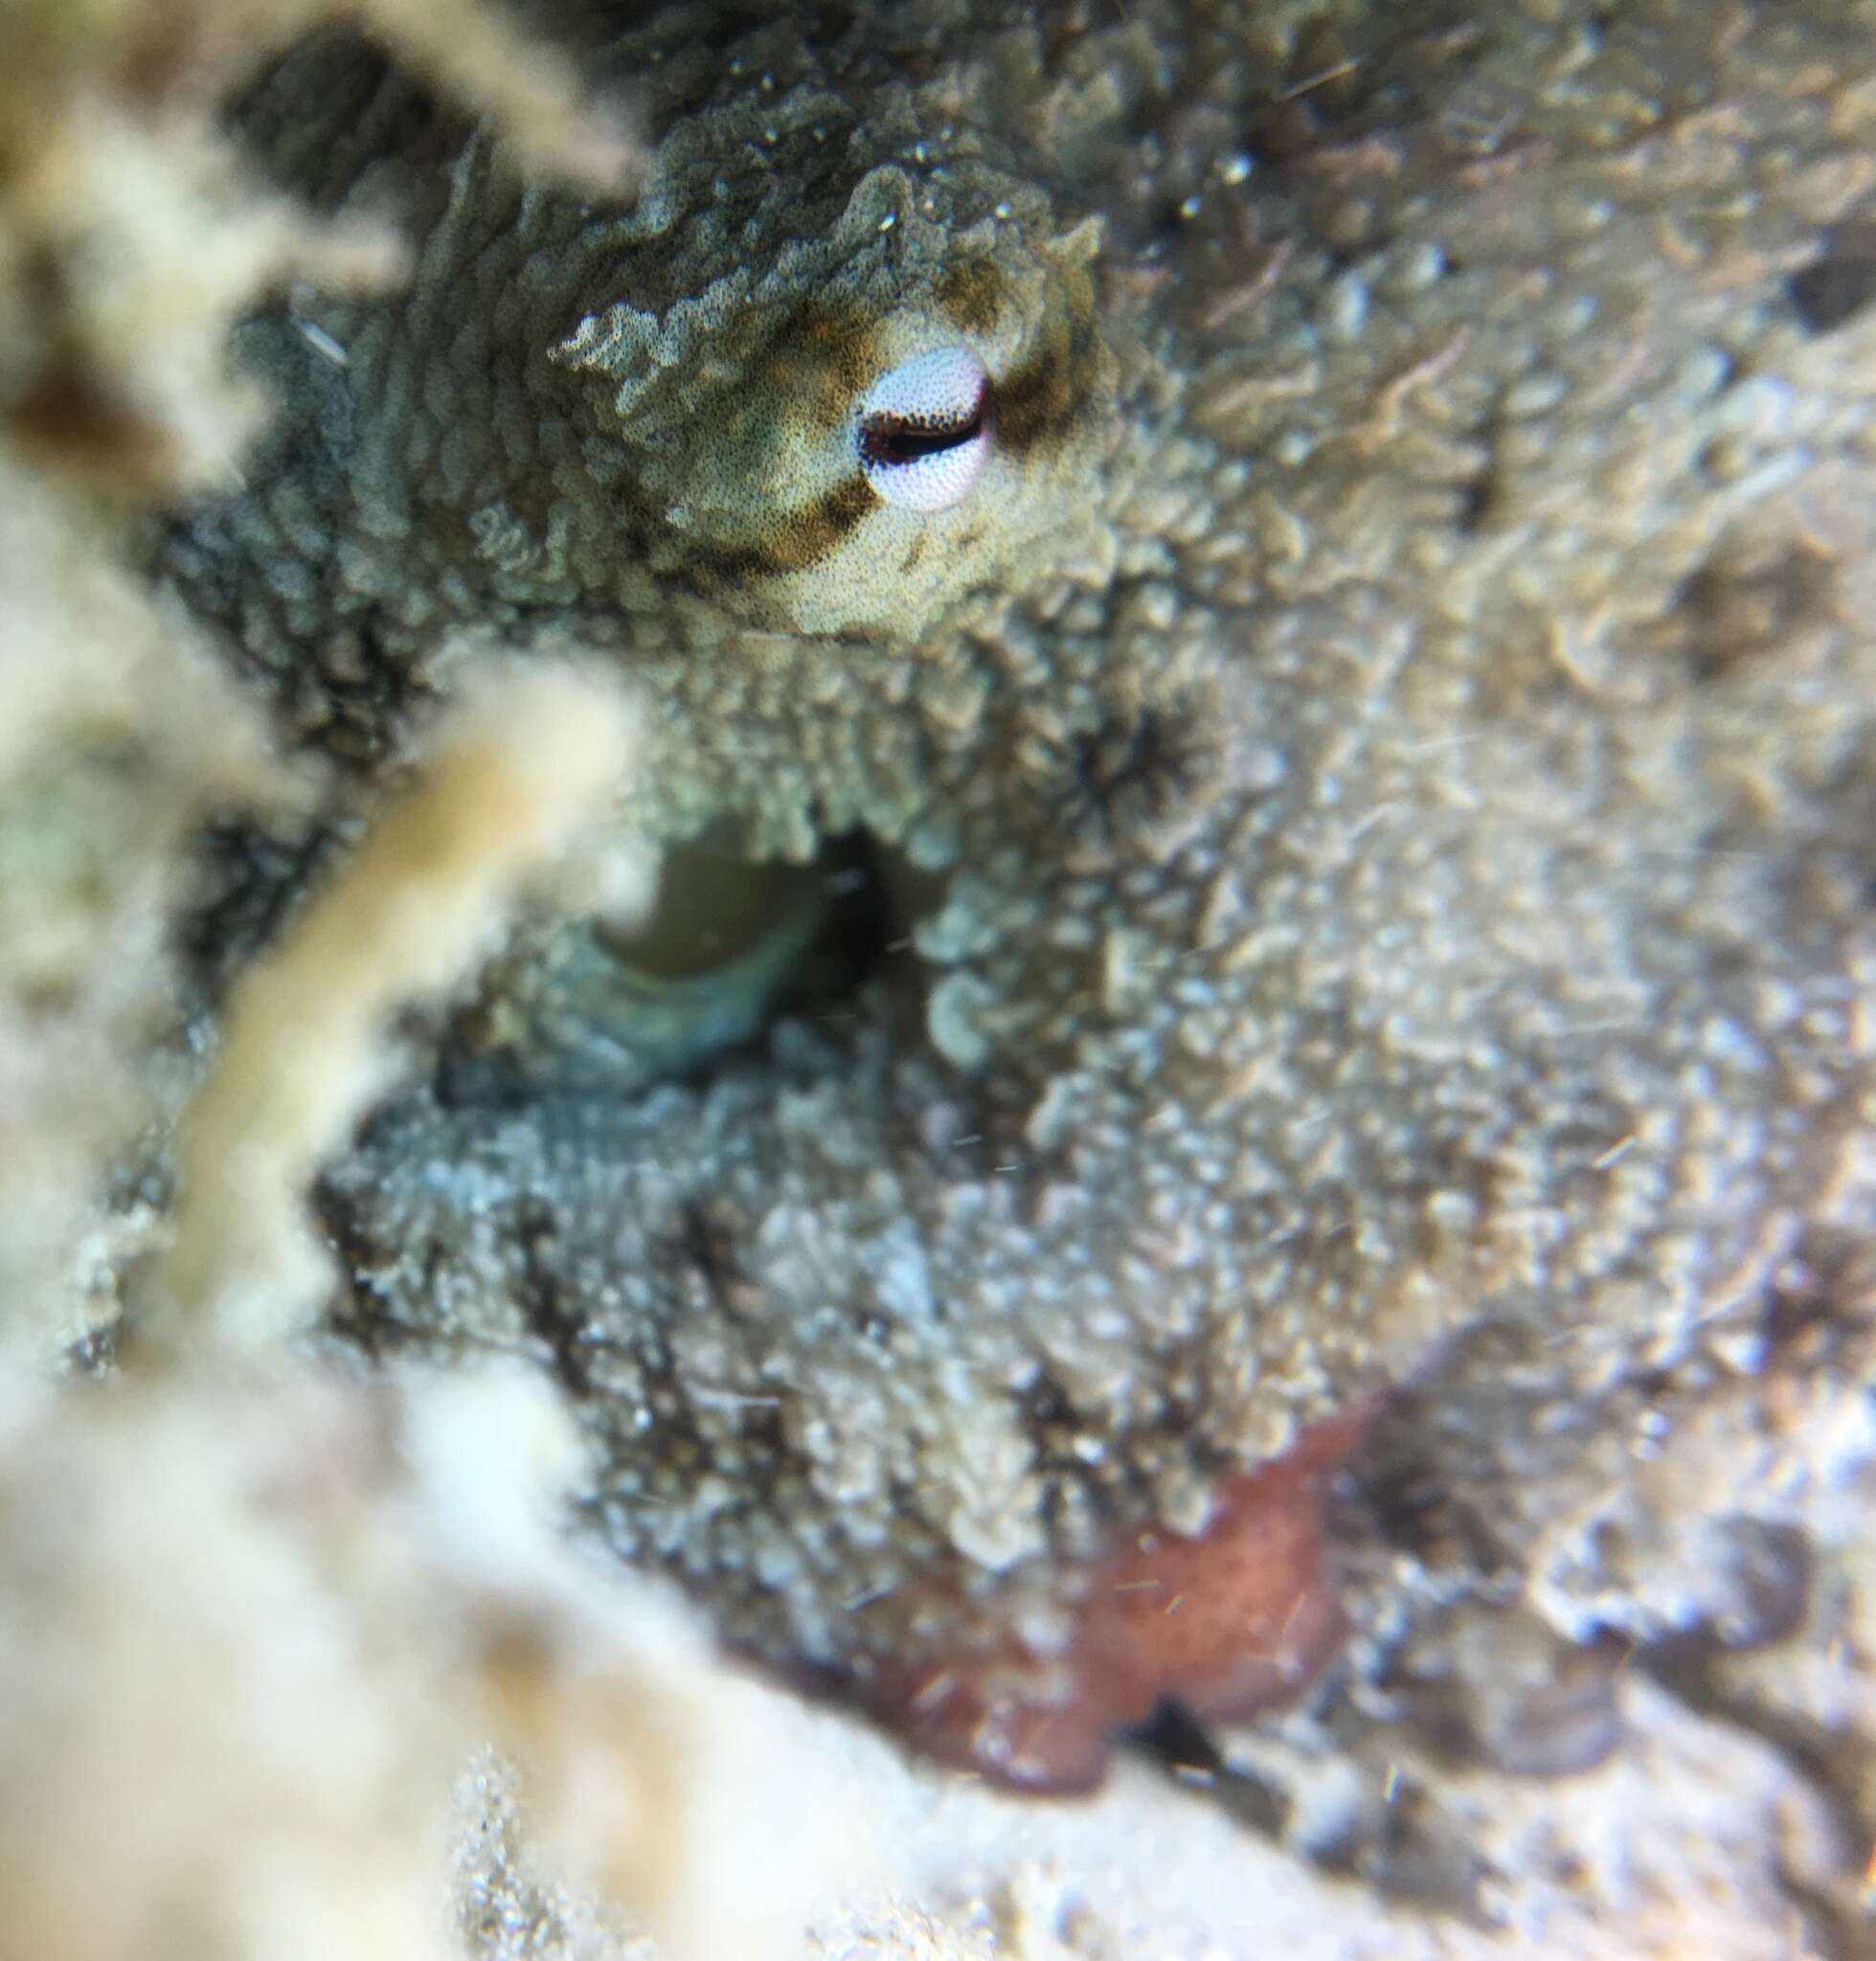 Image of Caribbean two-spot octopus